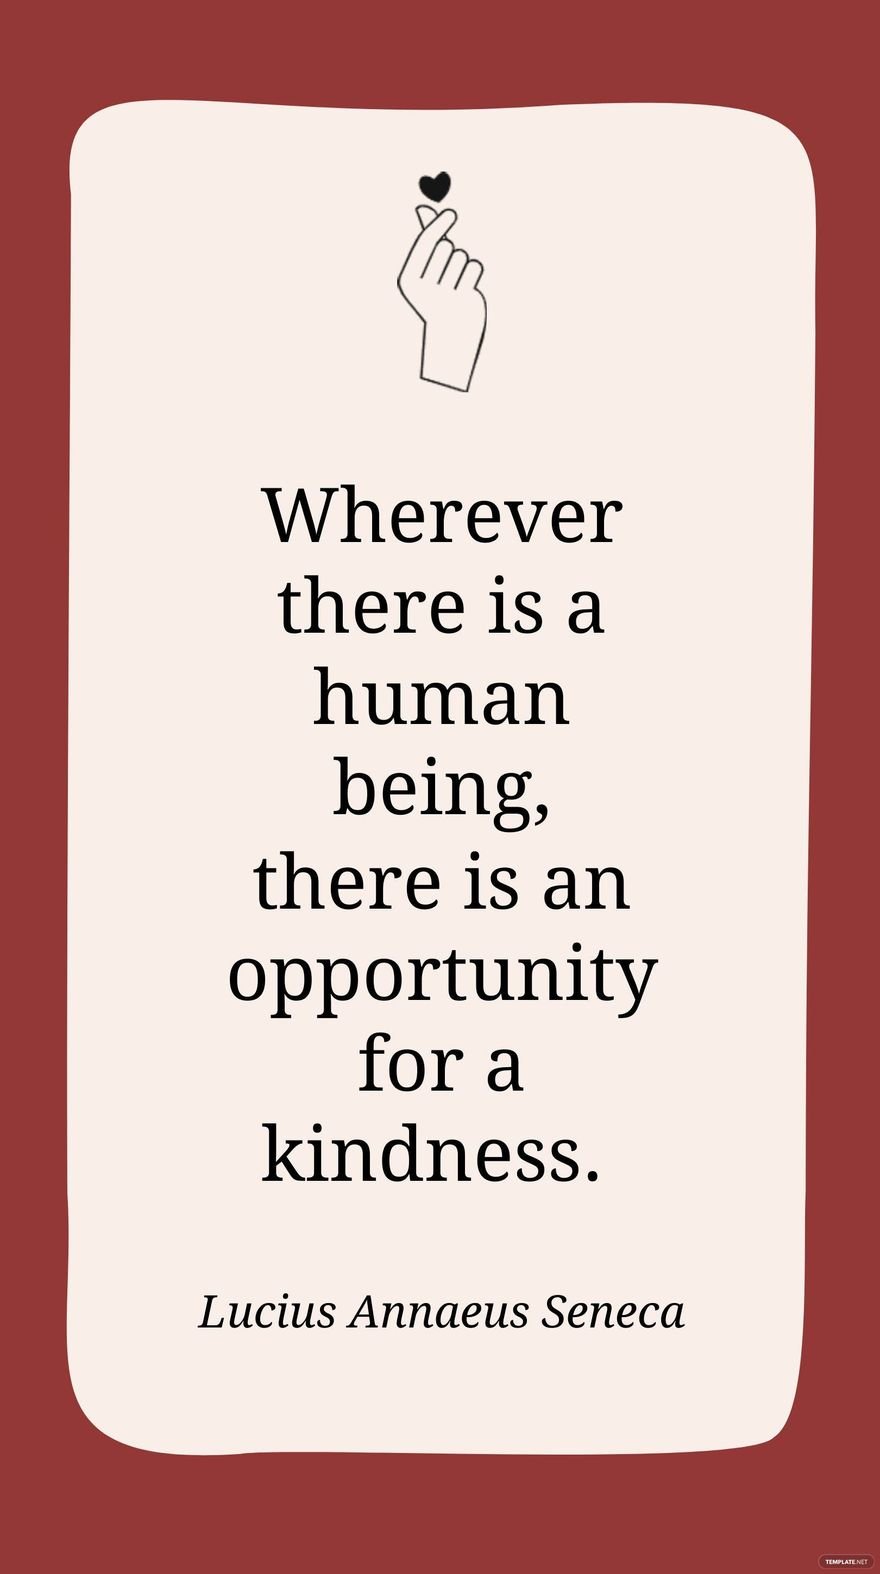 Lucius Annaeus Seneca - Wherever there is a human being, there is an opportunity for a kindness. in JPG